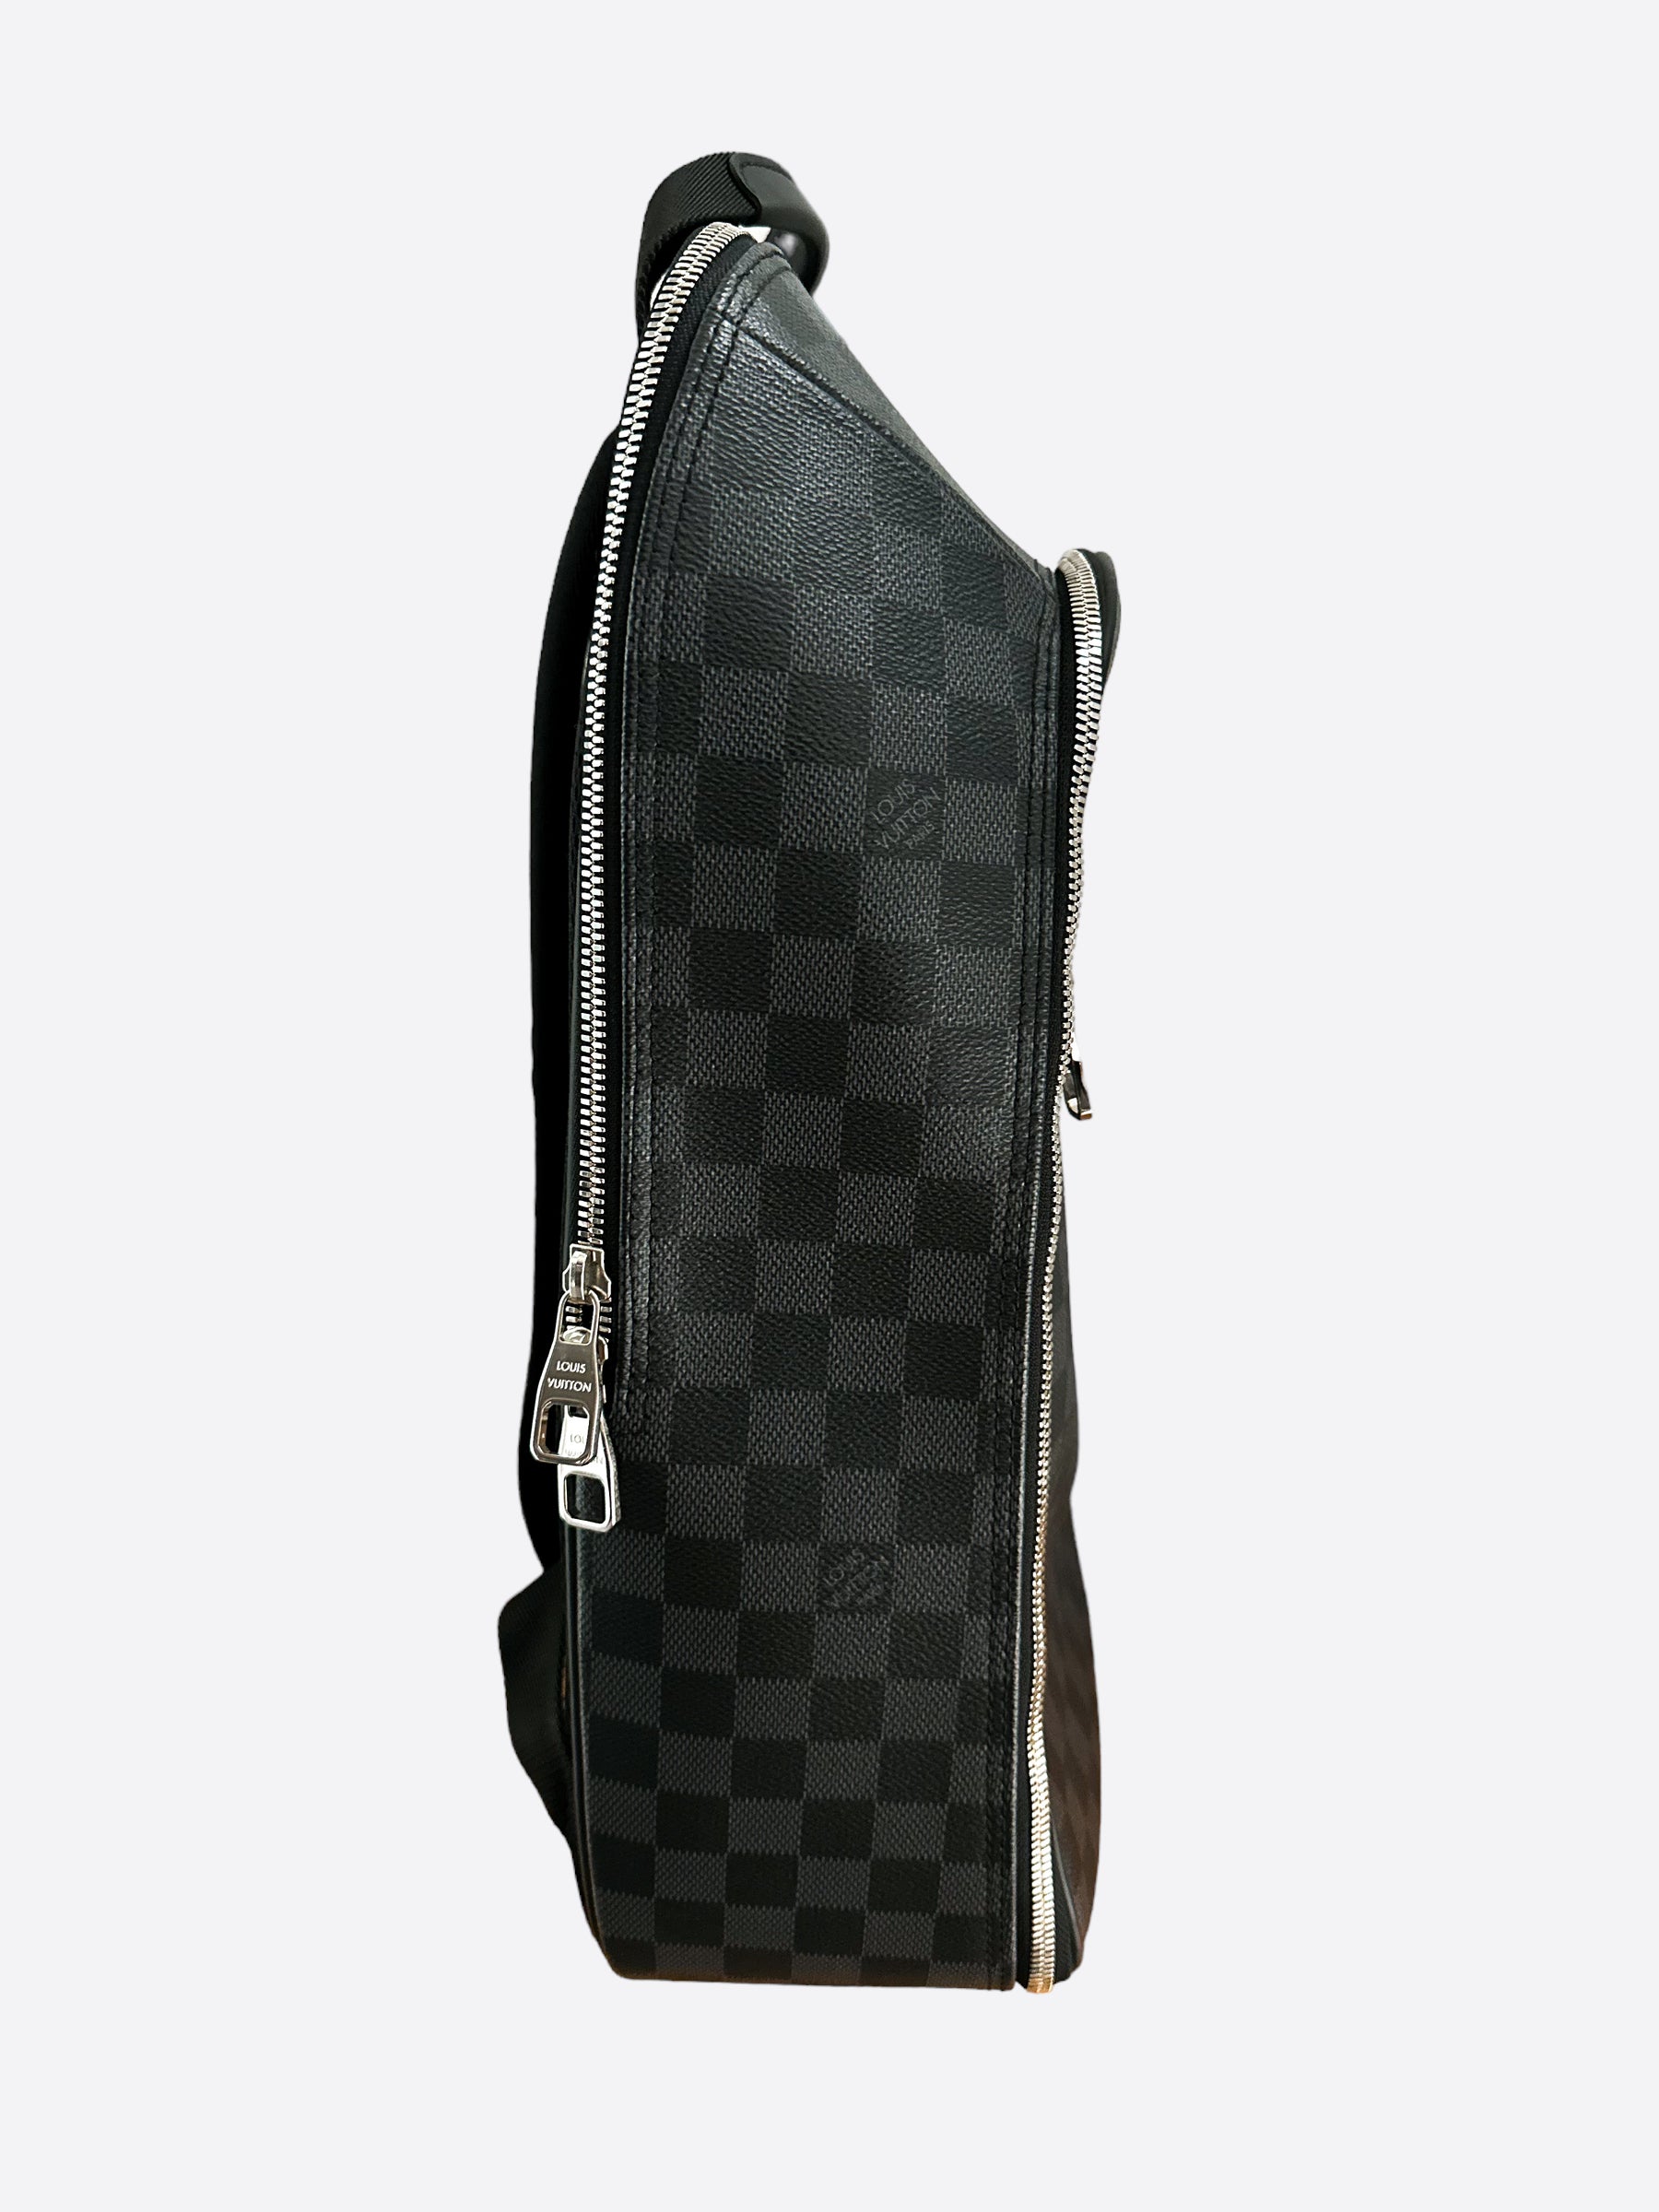 Louis Vuitton Michael Backpack in Graphite for Sale in Inglewood